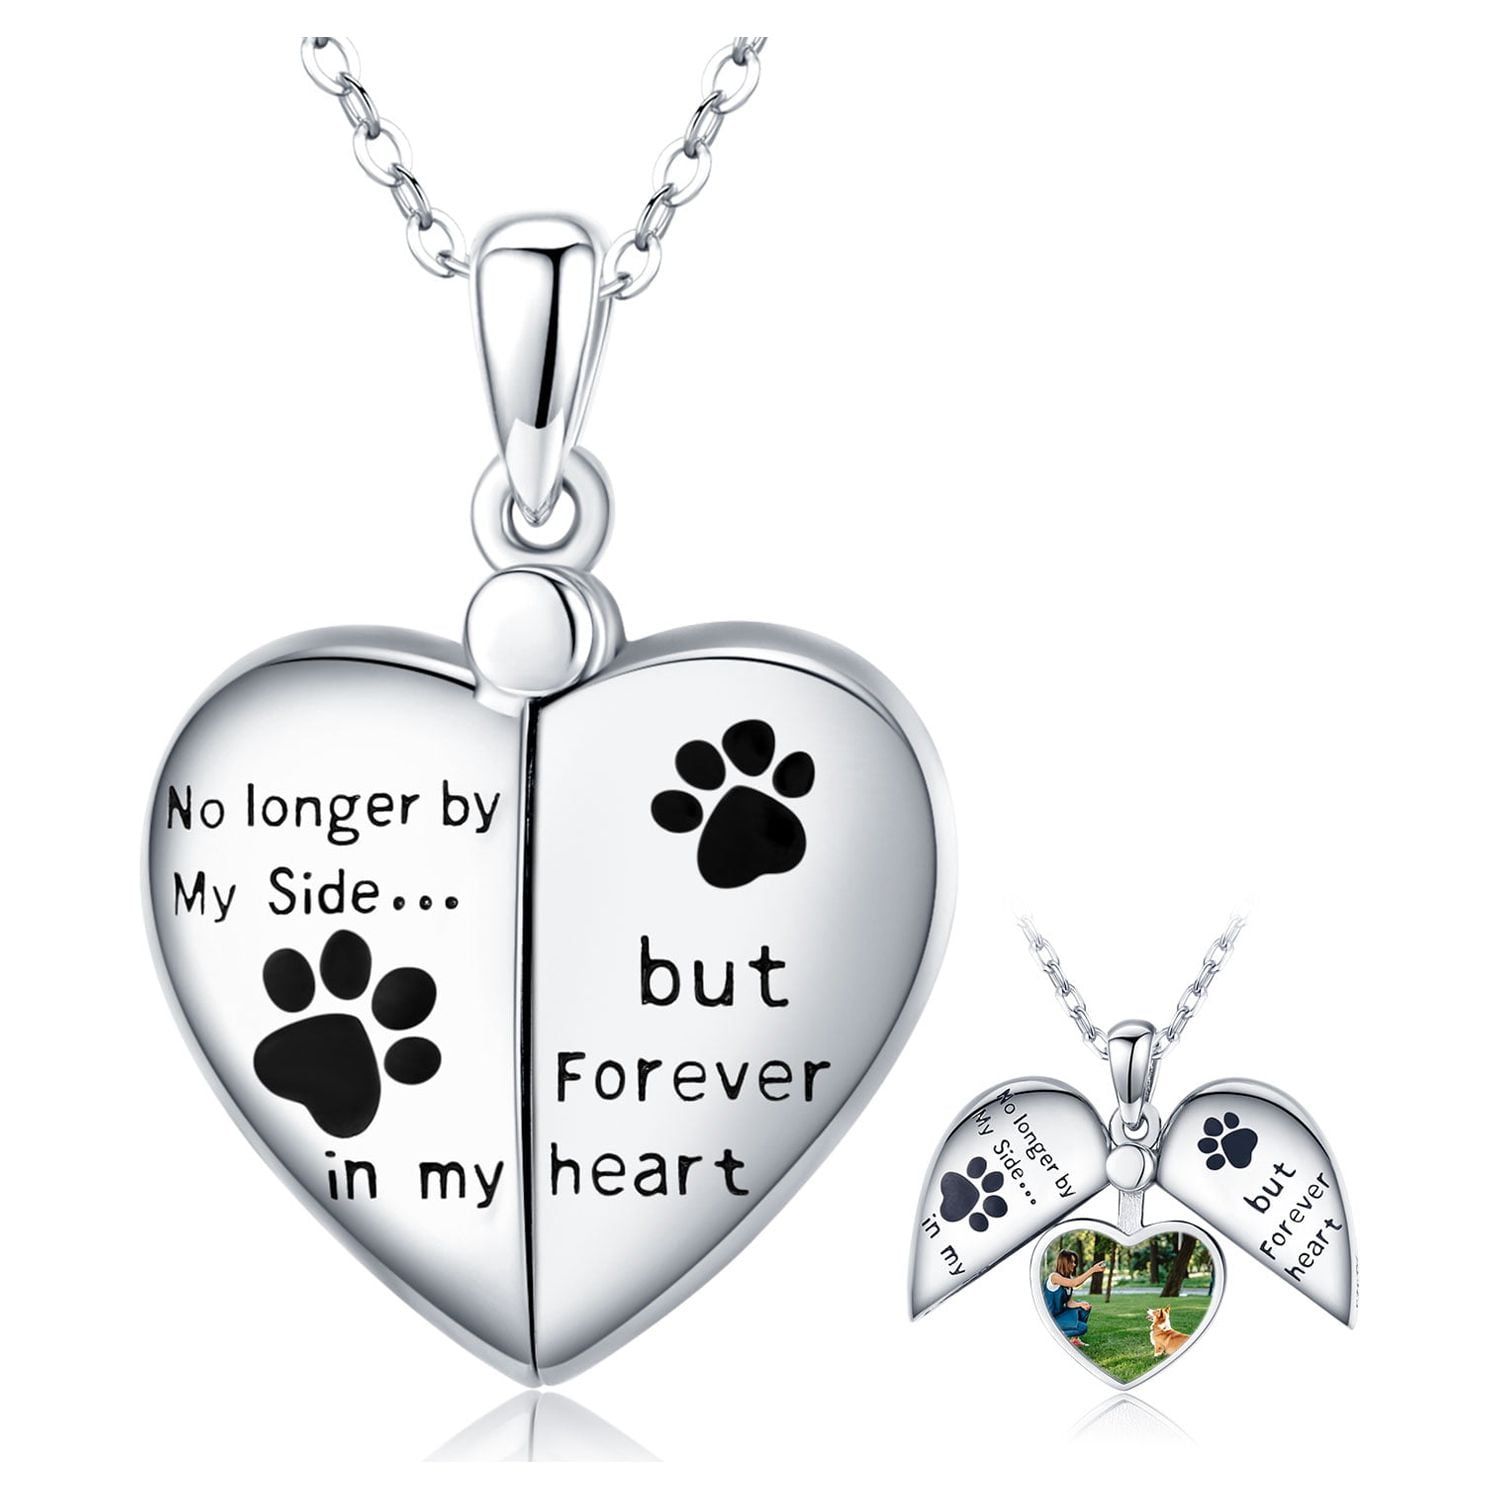 Stainless Steel Cat Dog Paw Print Pendant Necklace Fashion Chain Necklaces  For Women Girls Animal Jewelry Collar New